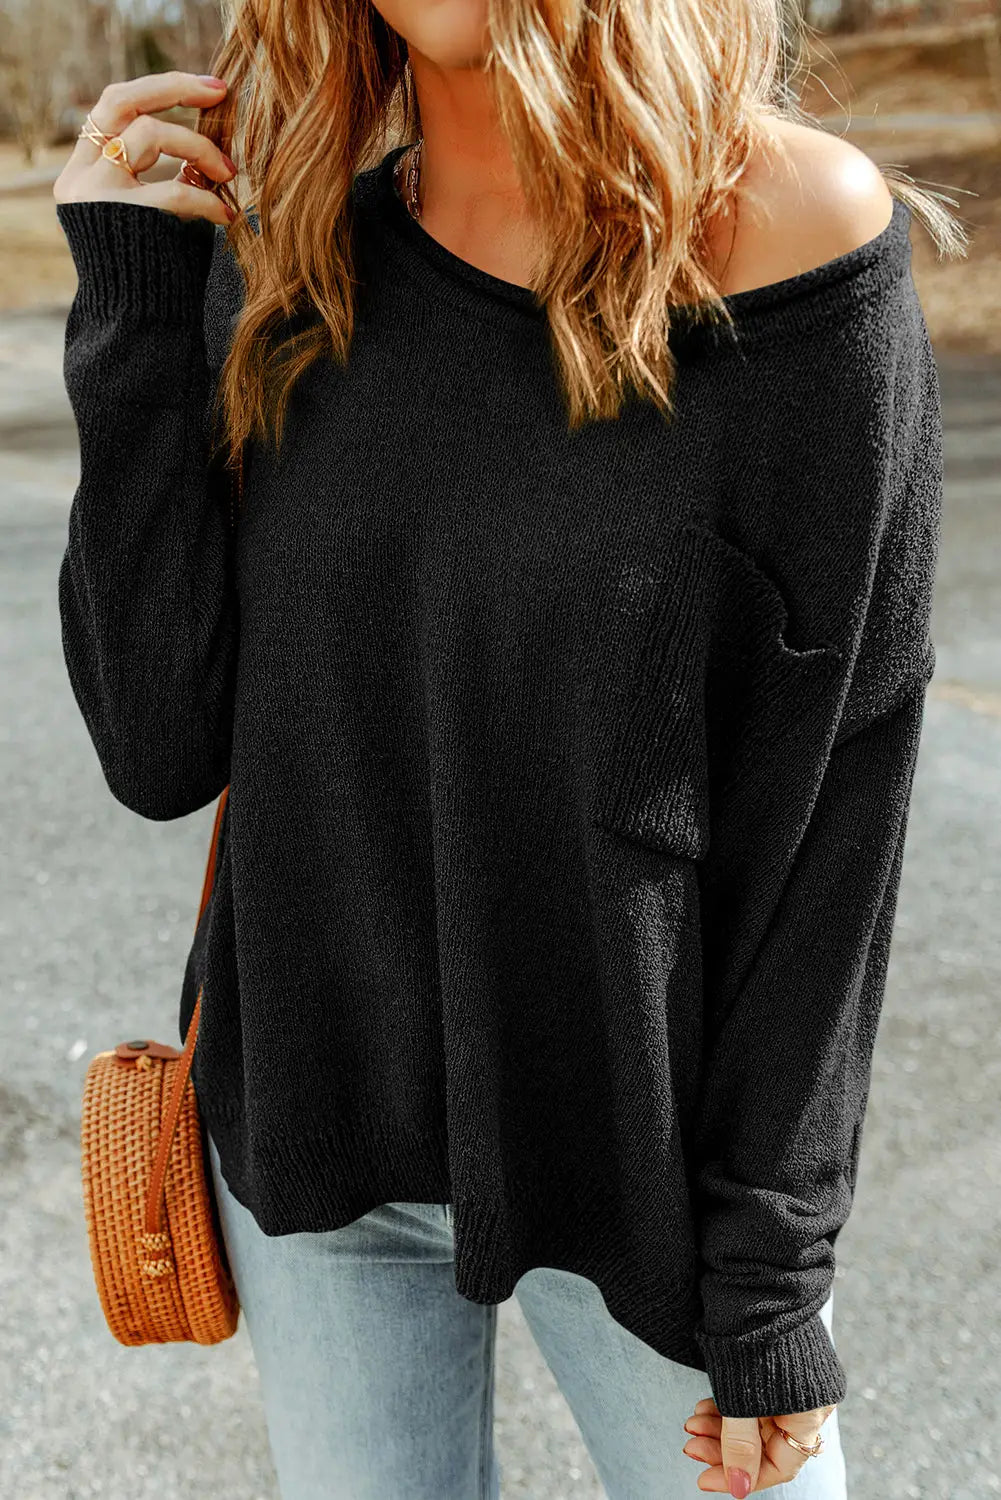 Black solid color off shoulder rib knit sweater with pocket - s / 100% acrylic - & cardigans